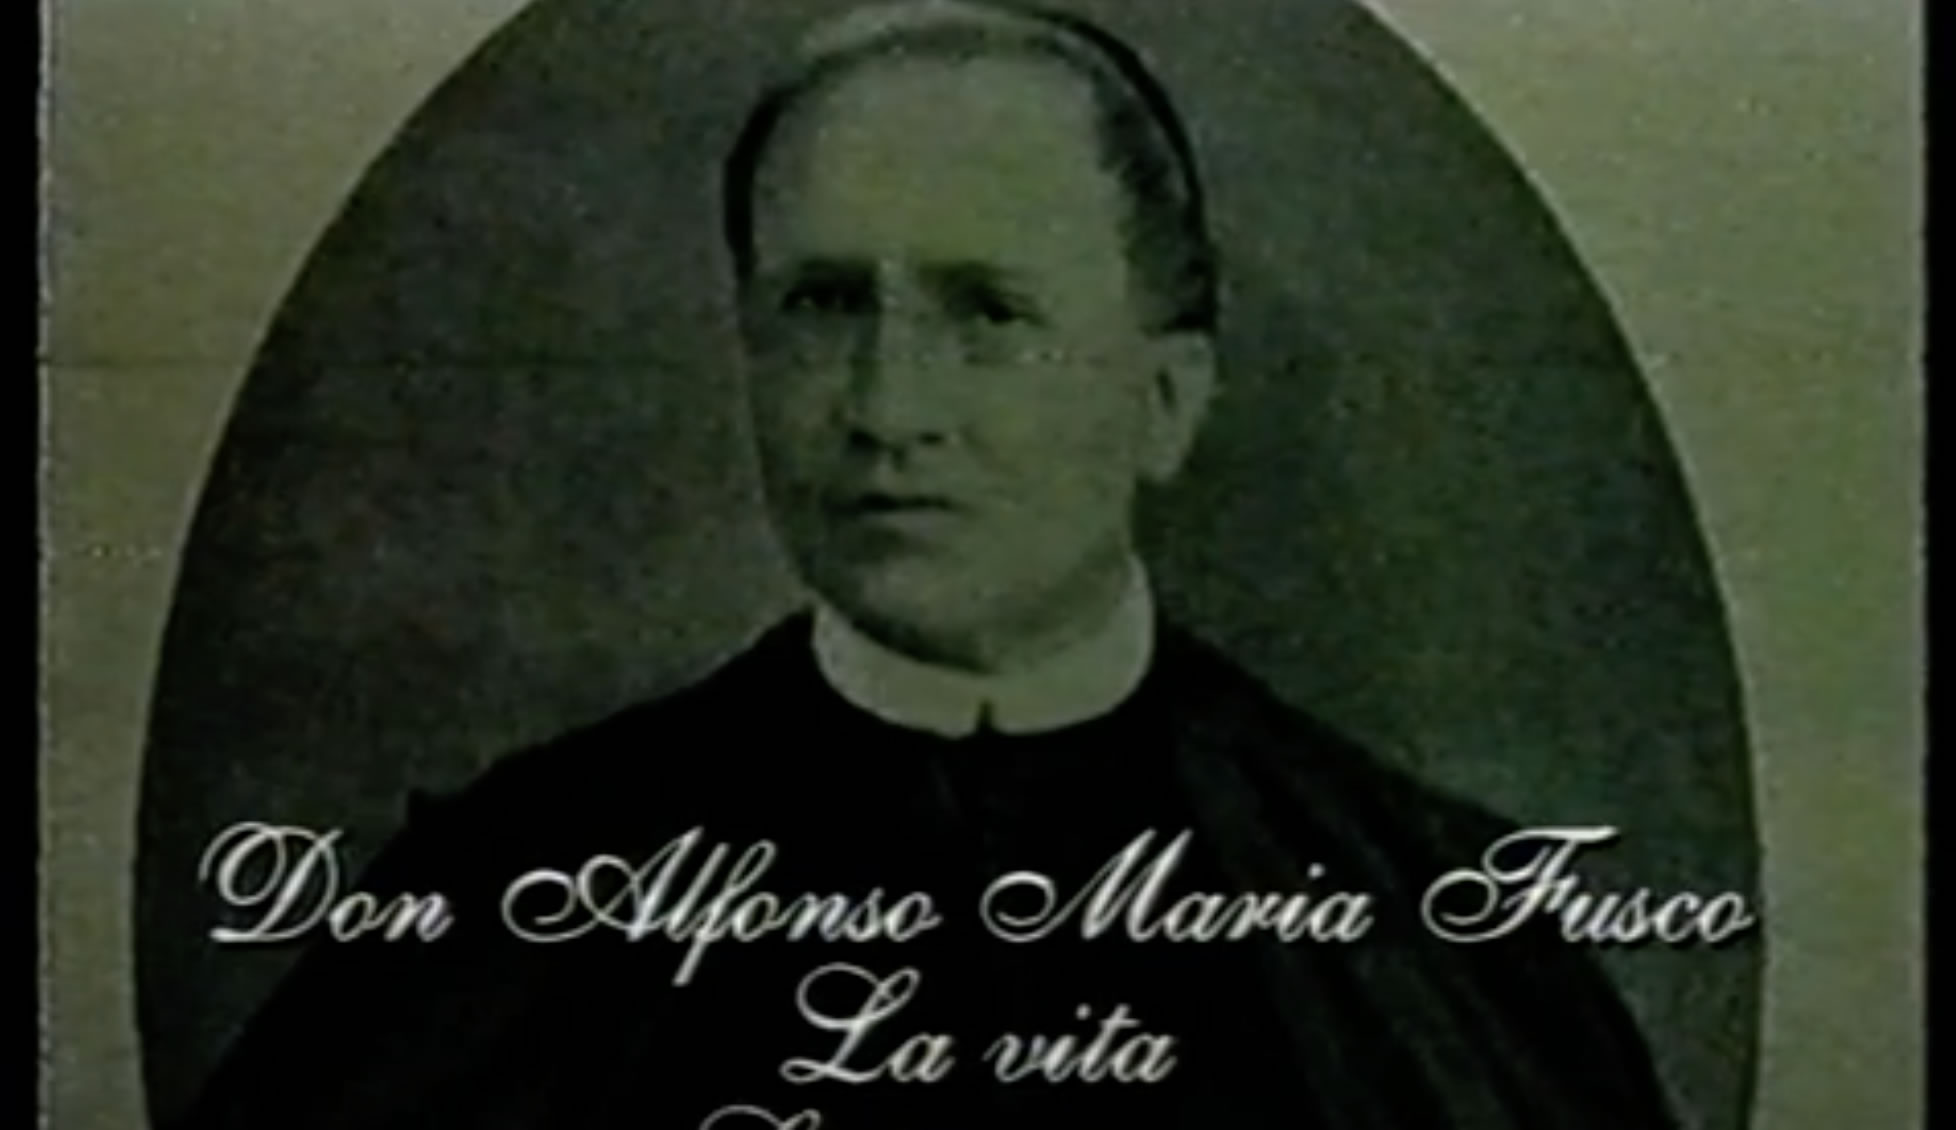 Video of the Founder, St. Alfonso Maria Fusco